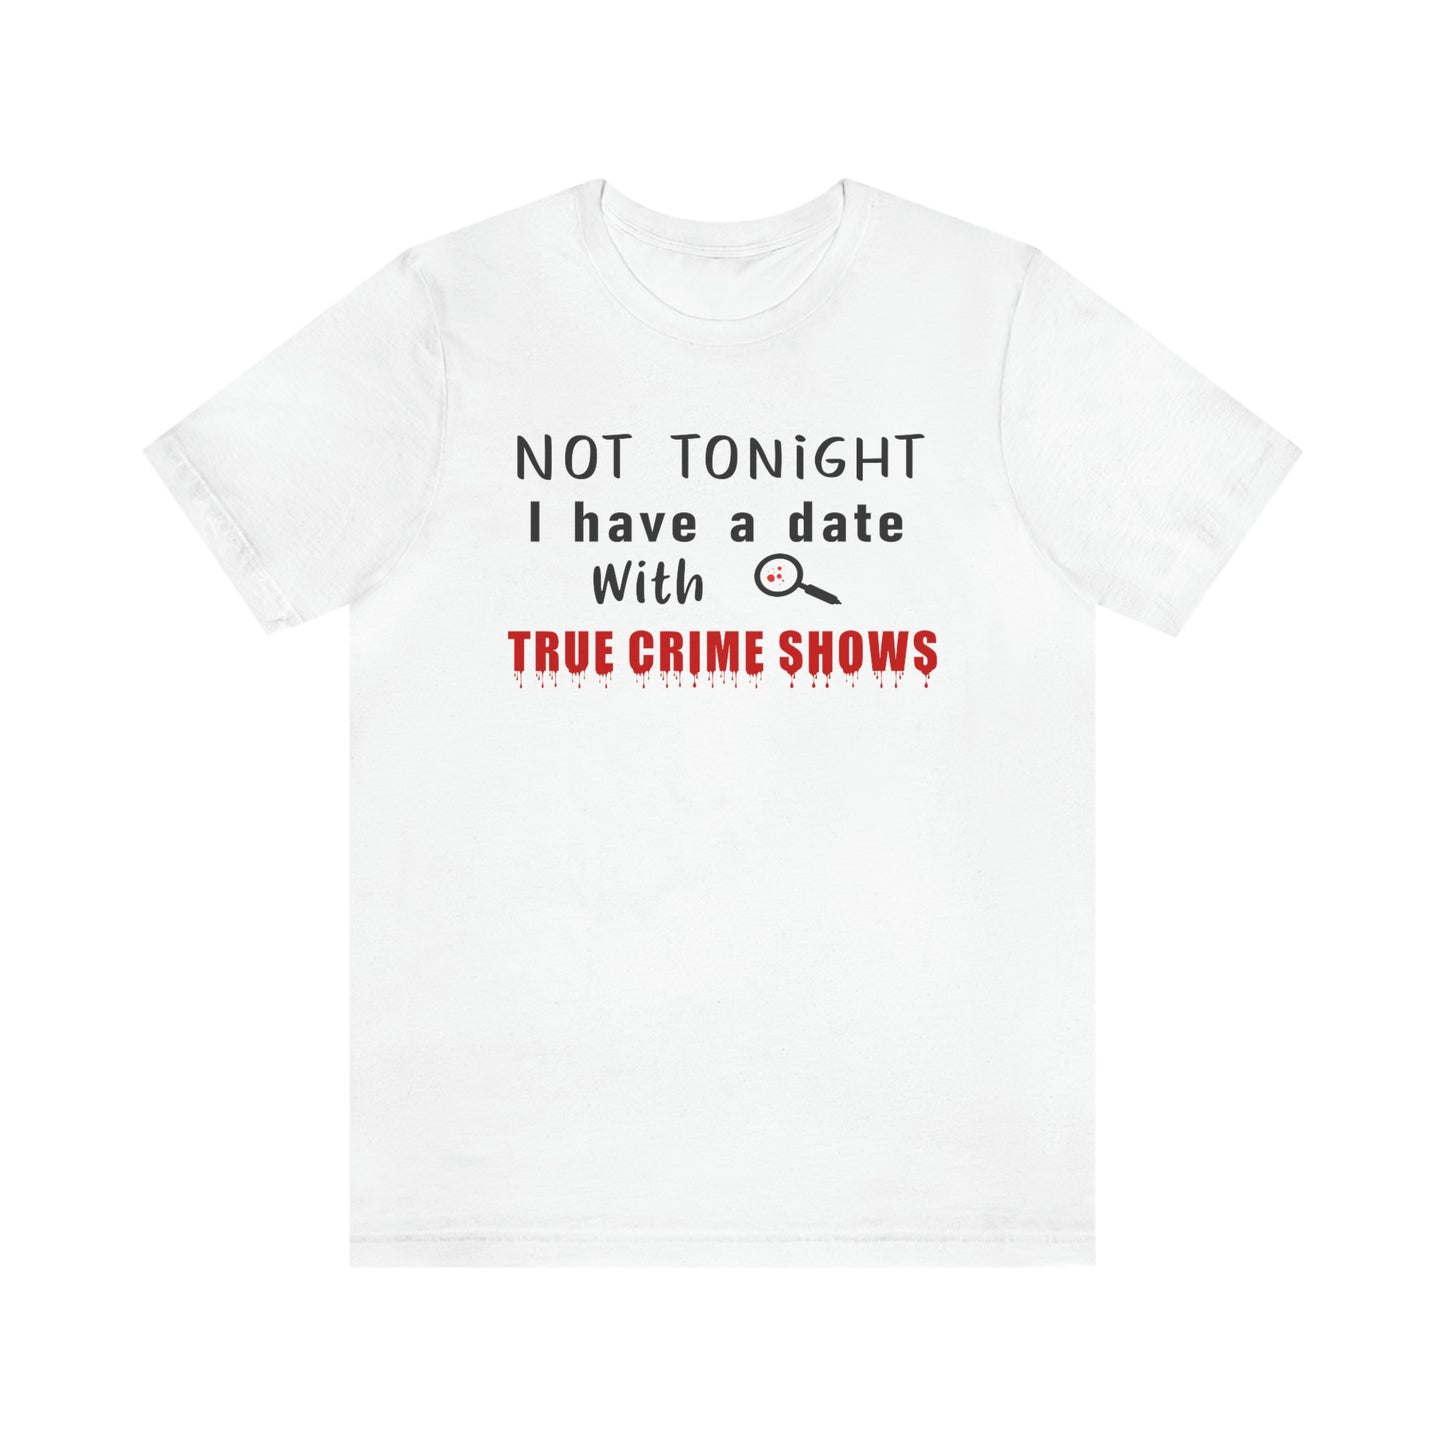 Not Tonight I have a date with True Crime Shows